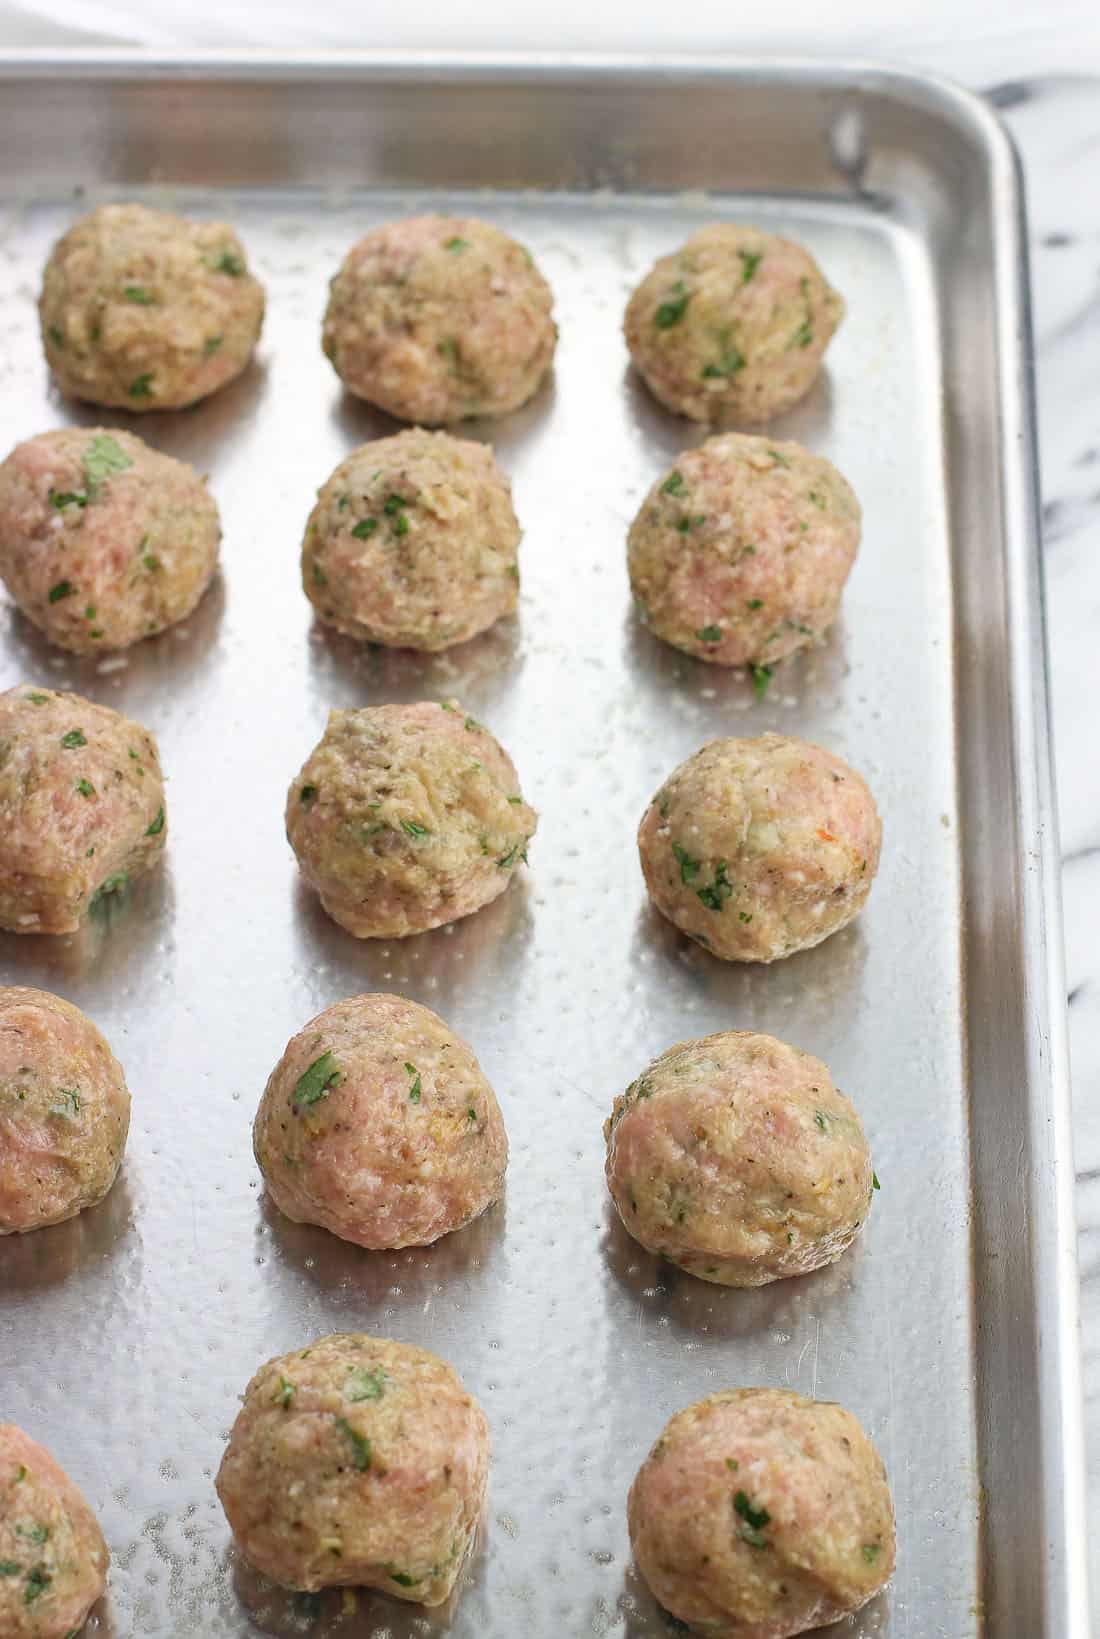 Raw turkey meatballs lined up on a greased baking sheet.